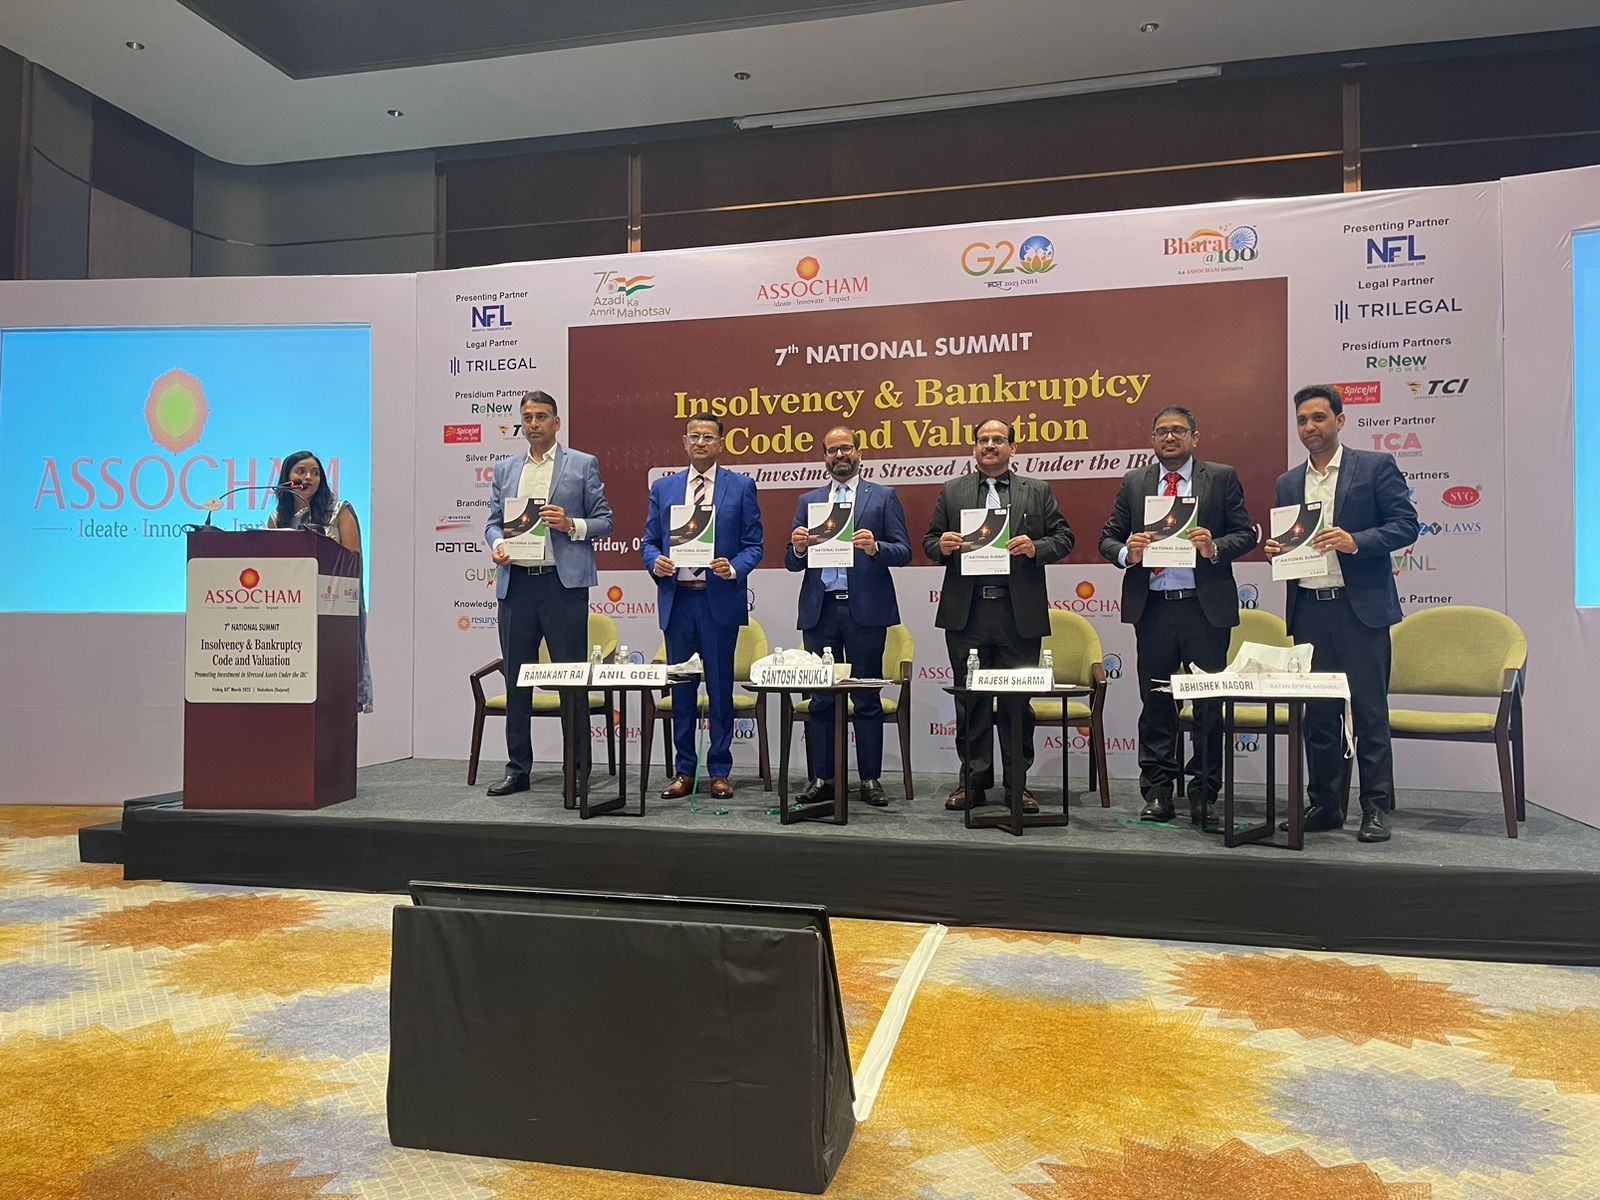 7th National Summit- Insolvency & bankruptcy code and valuation